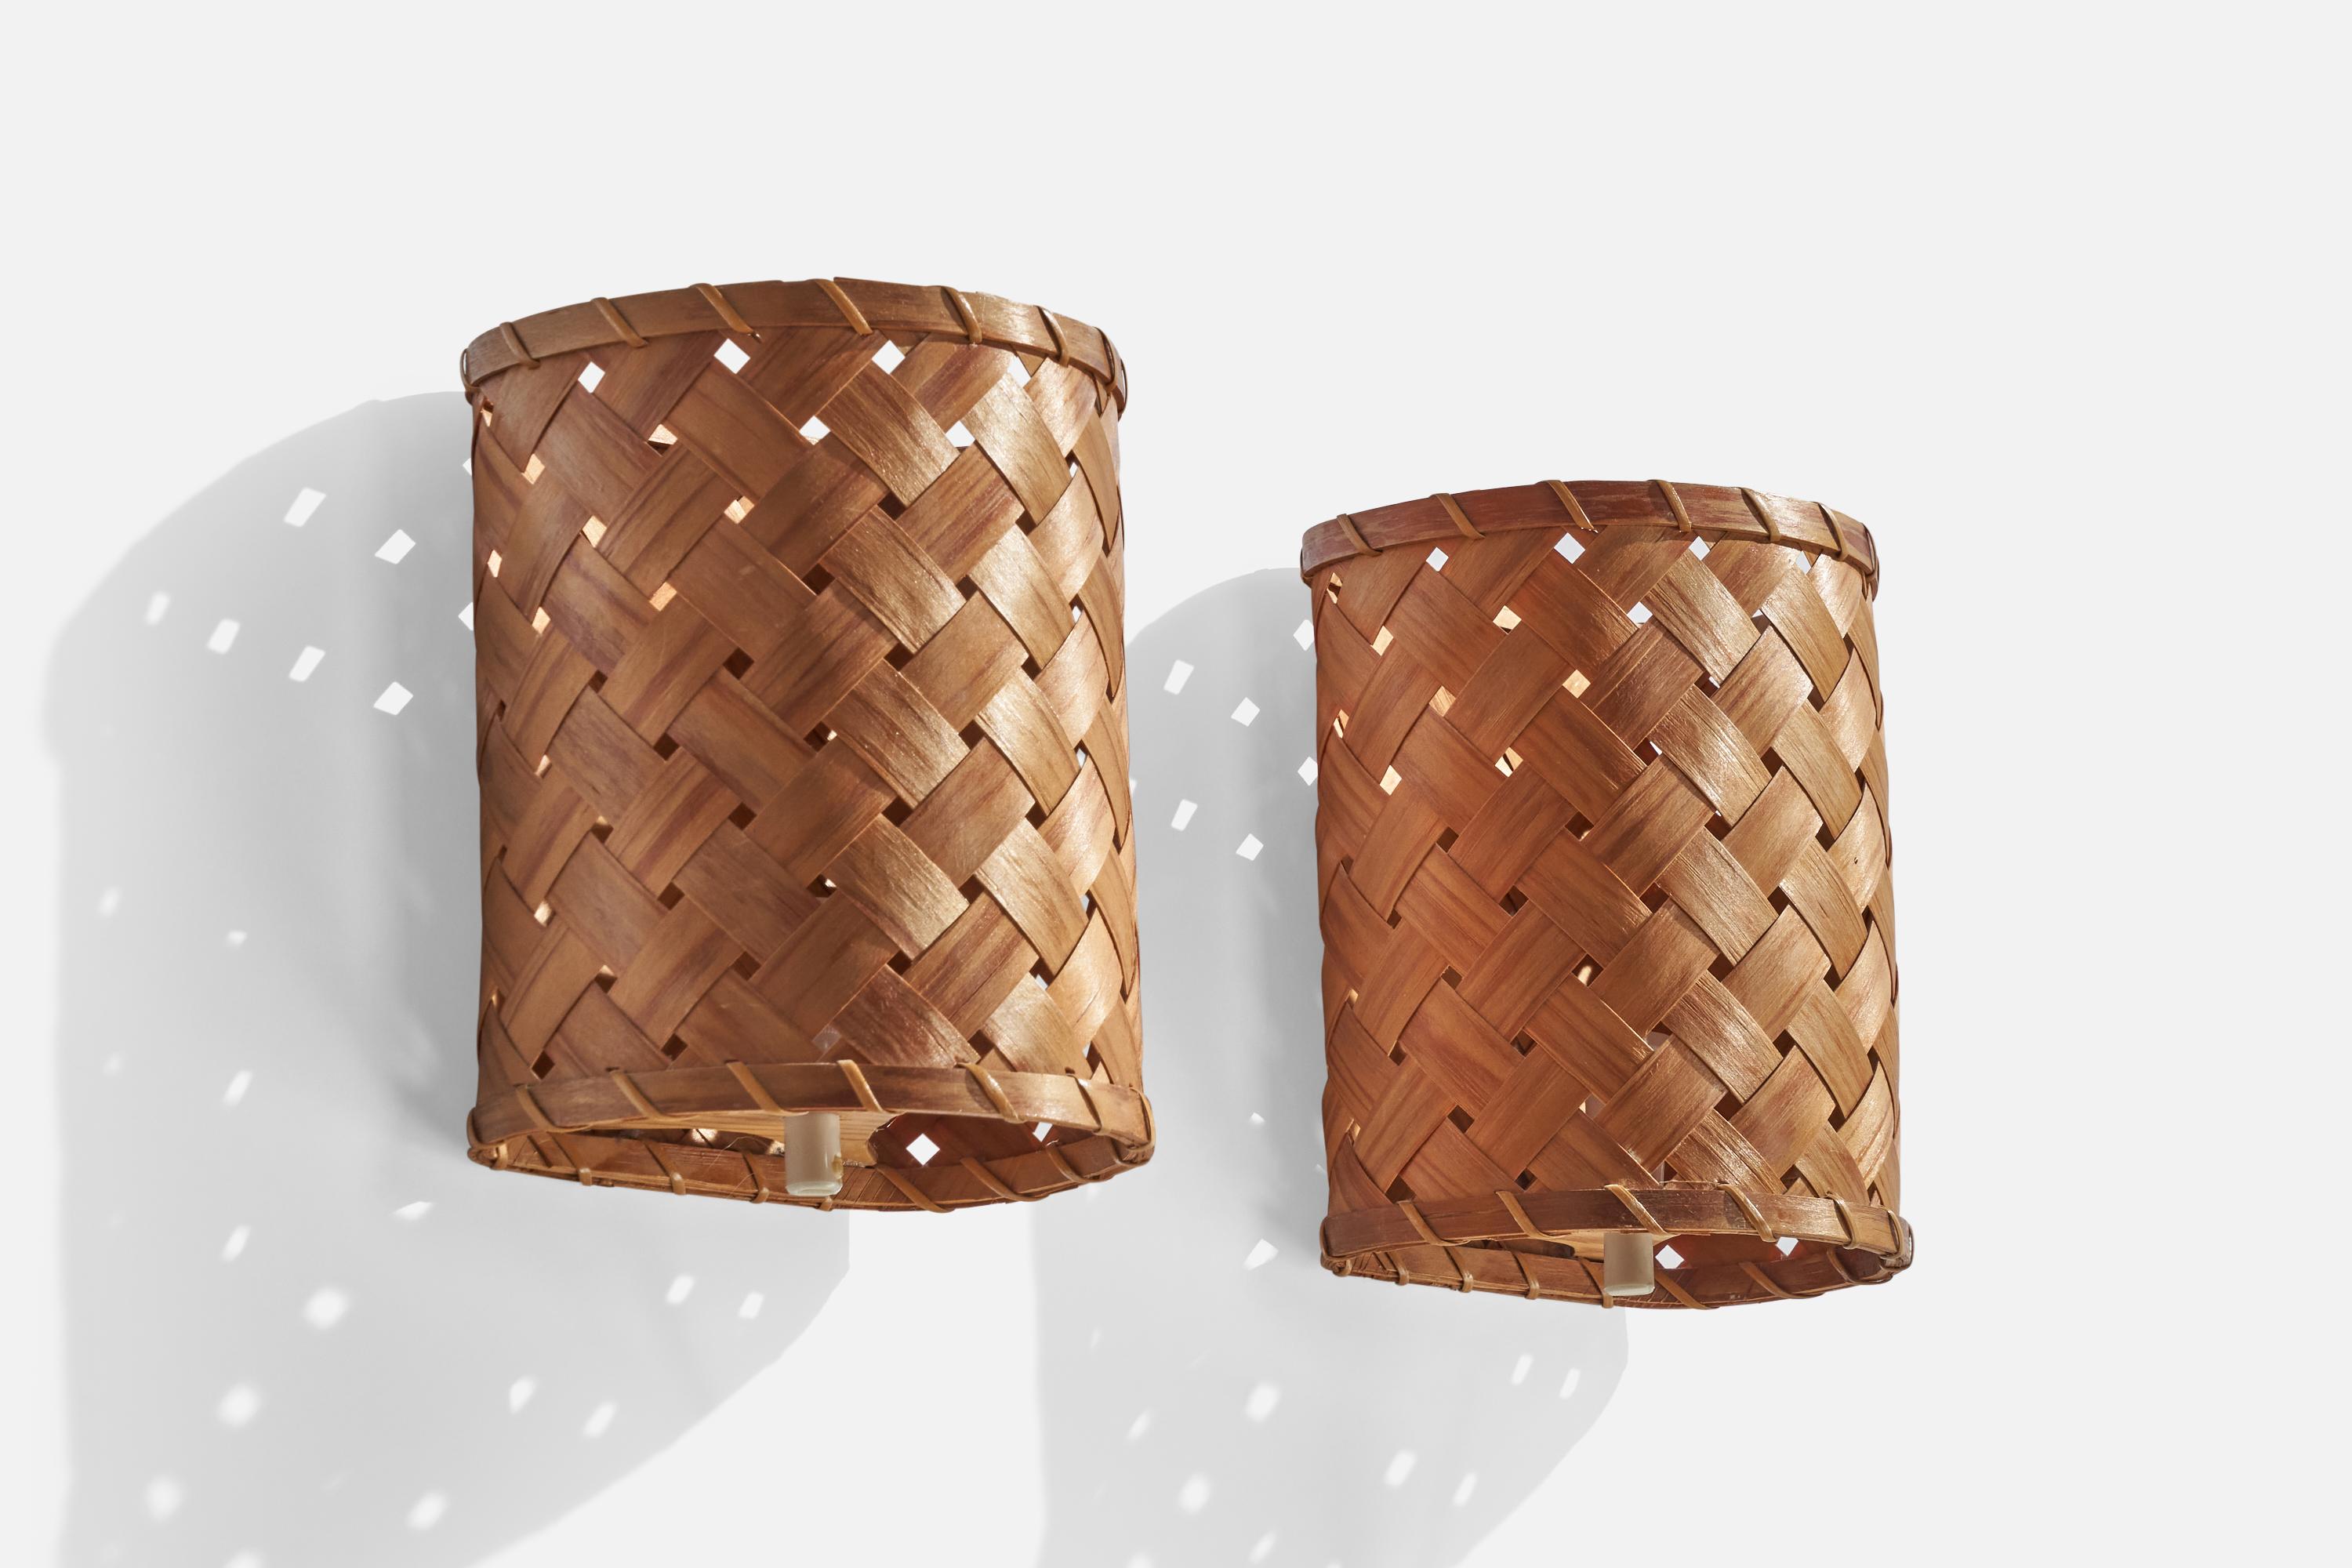 A pair of woven pine veneer wall lights designed and produced in Sweden, 1960s.

Overall Dimensions (inches): 9.5” H x 7.5”  W x 5.5”  D
Back Plate Dimensions (inches): N/A
Bulb Specifications: E-14 Bulb
Number of Sockets: 1
All lighting will be